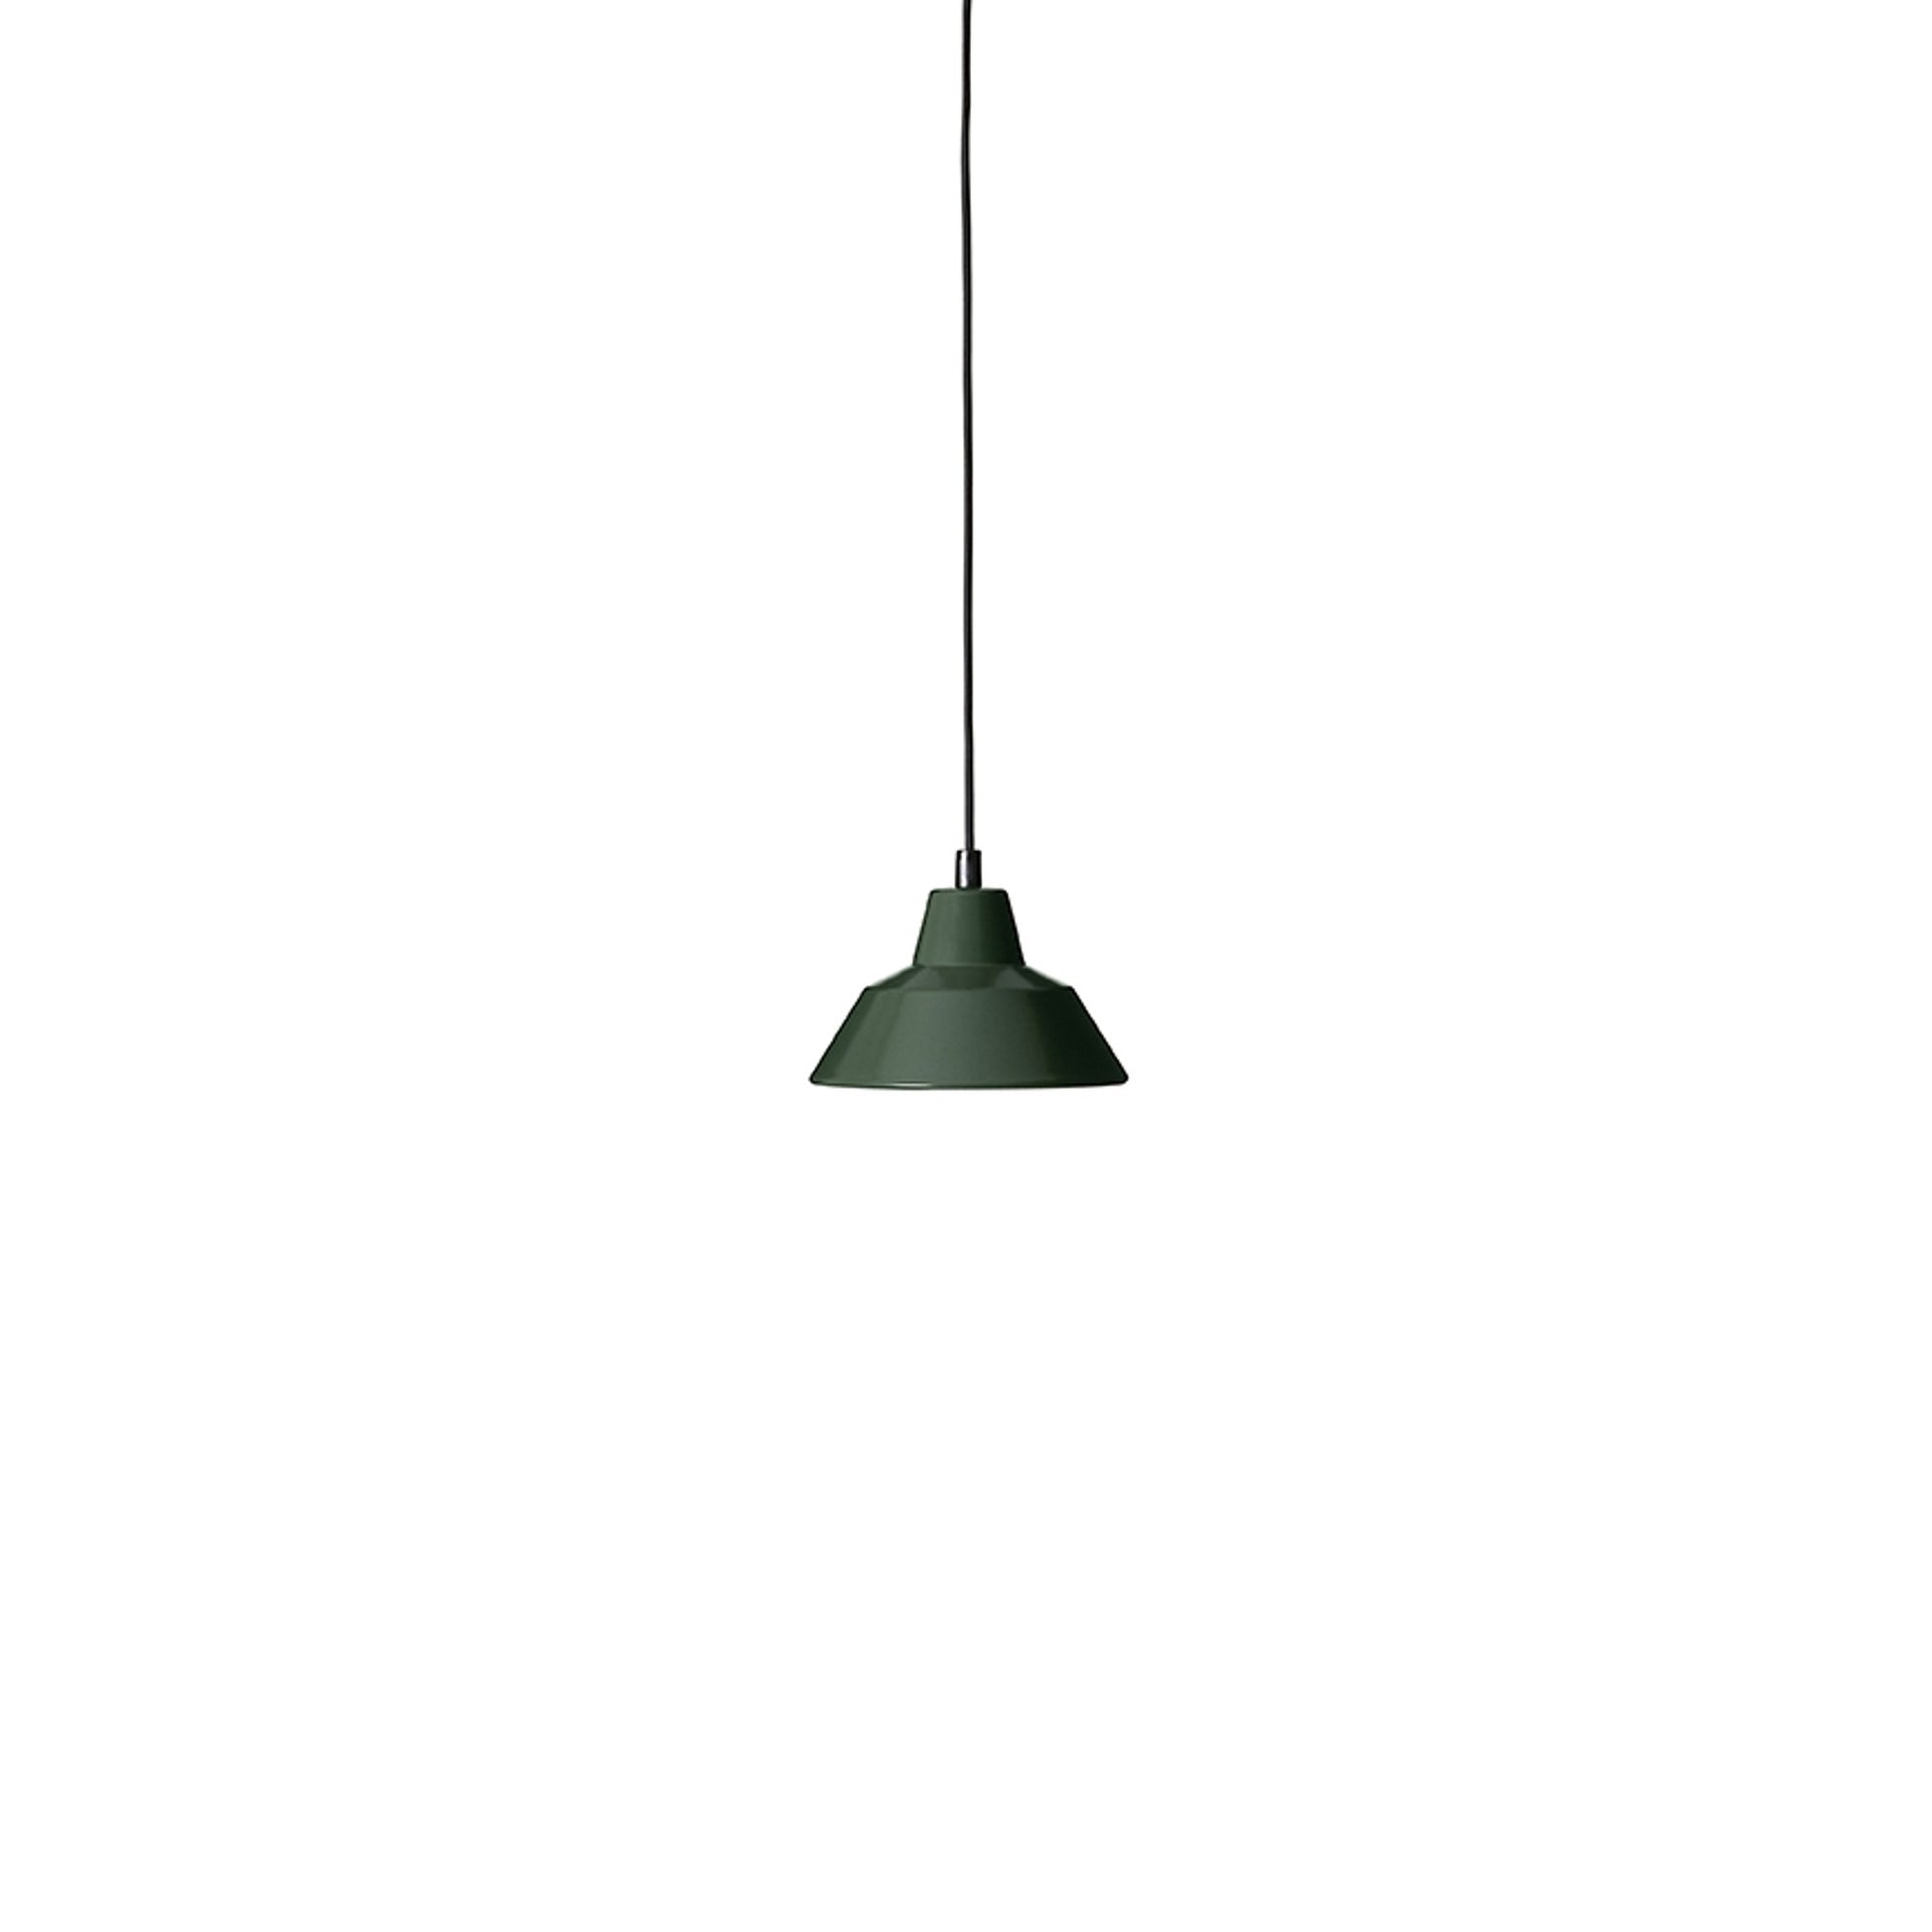 Workshop Lamp Pendant Lamp W1 by Made By Hand #Racing Green